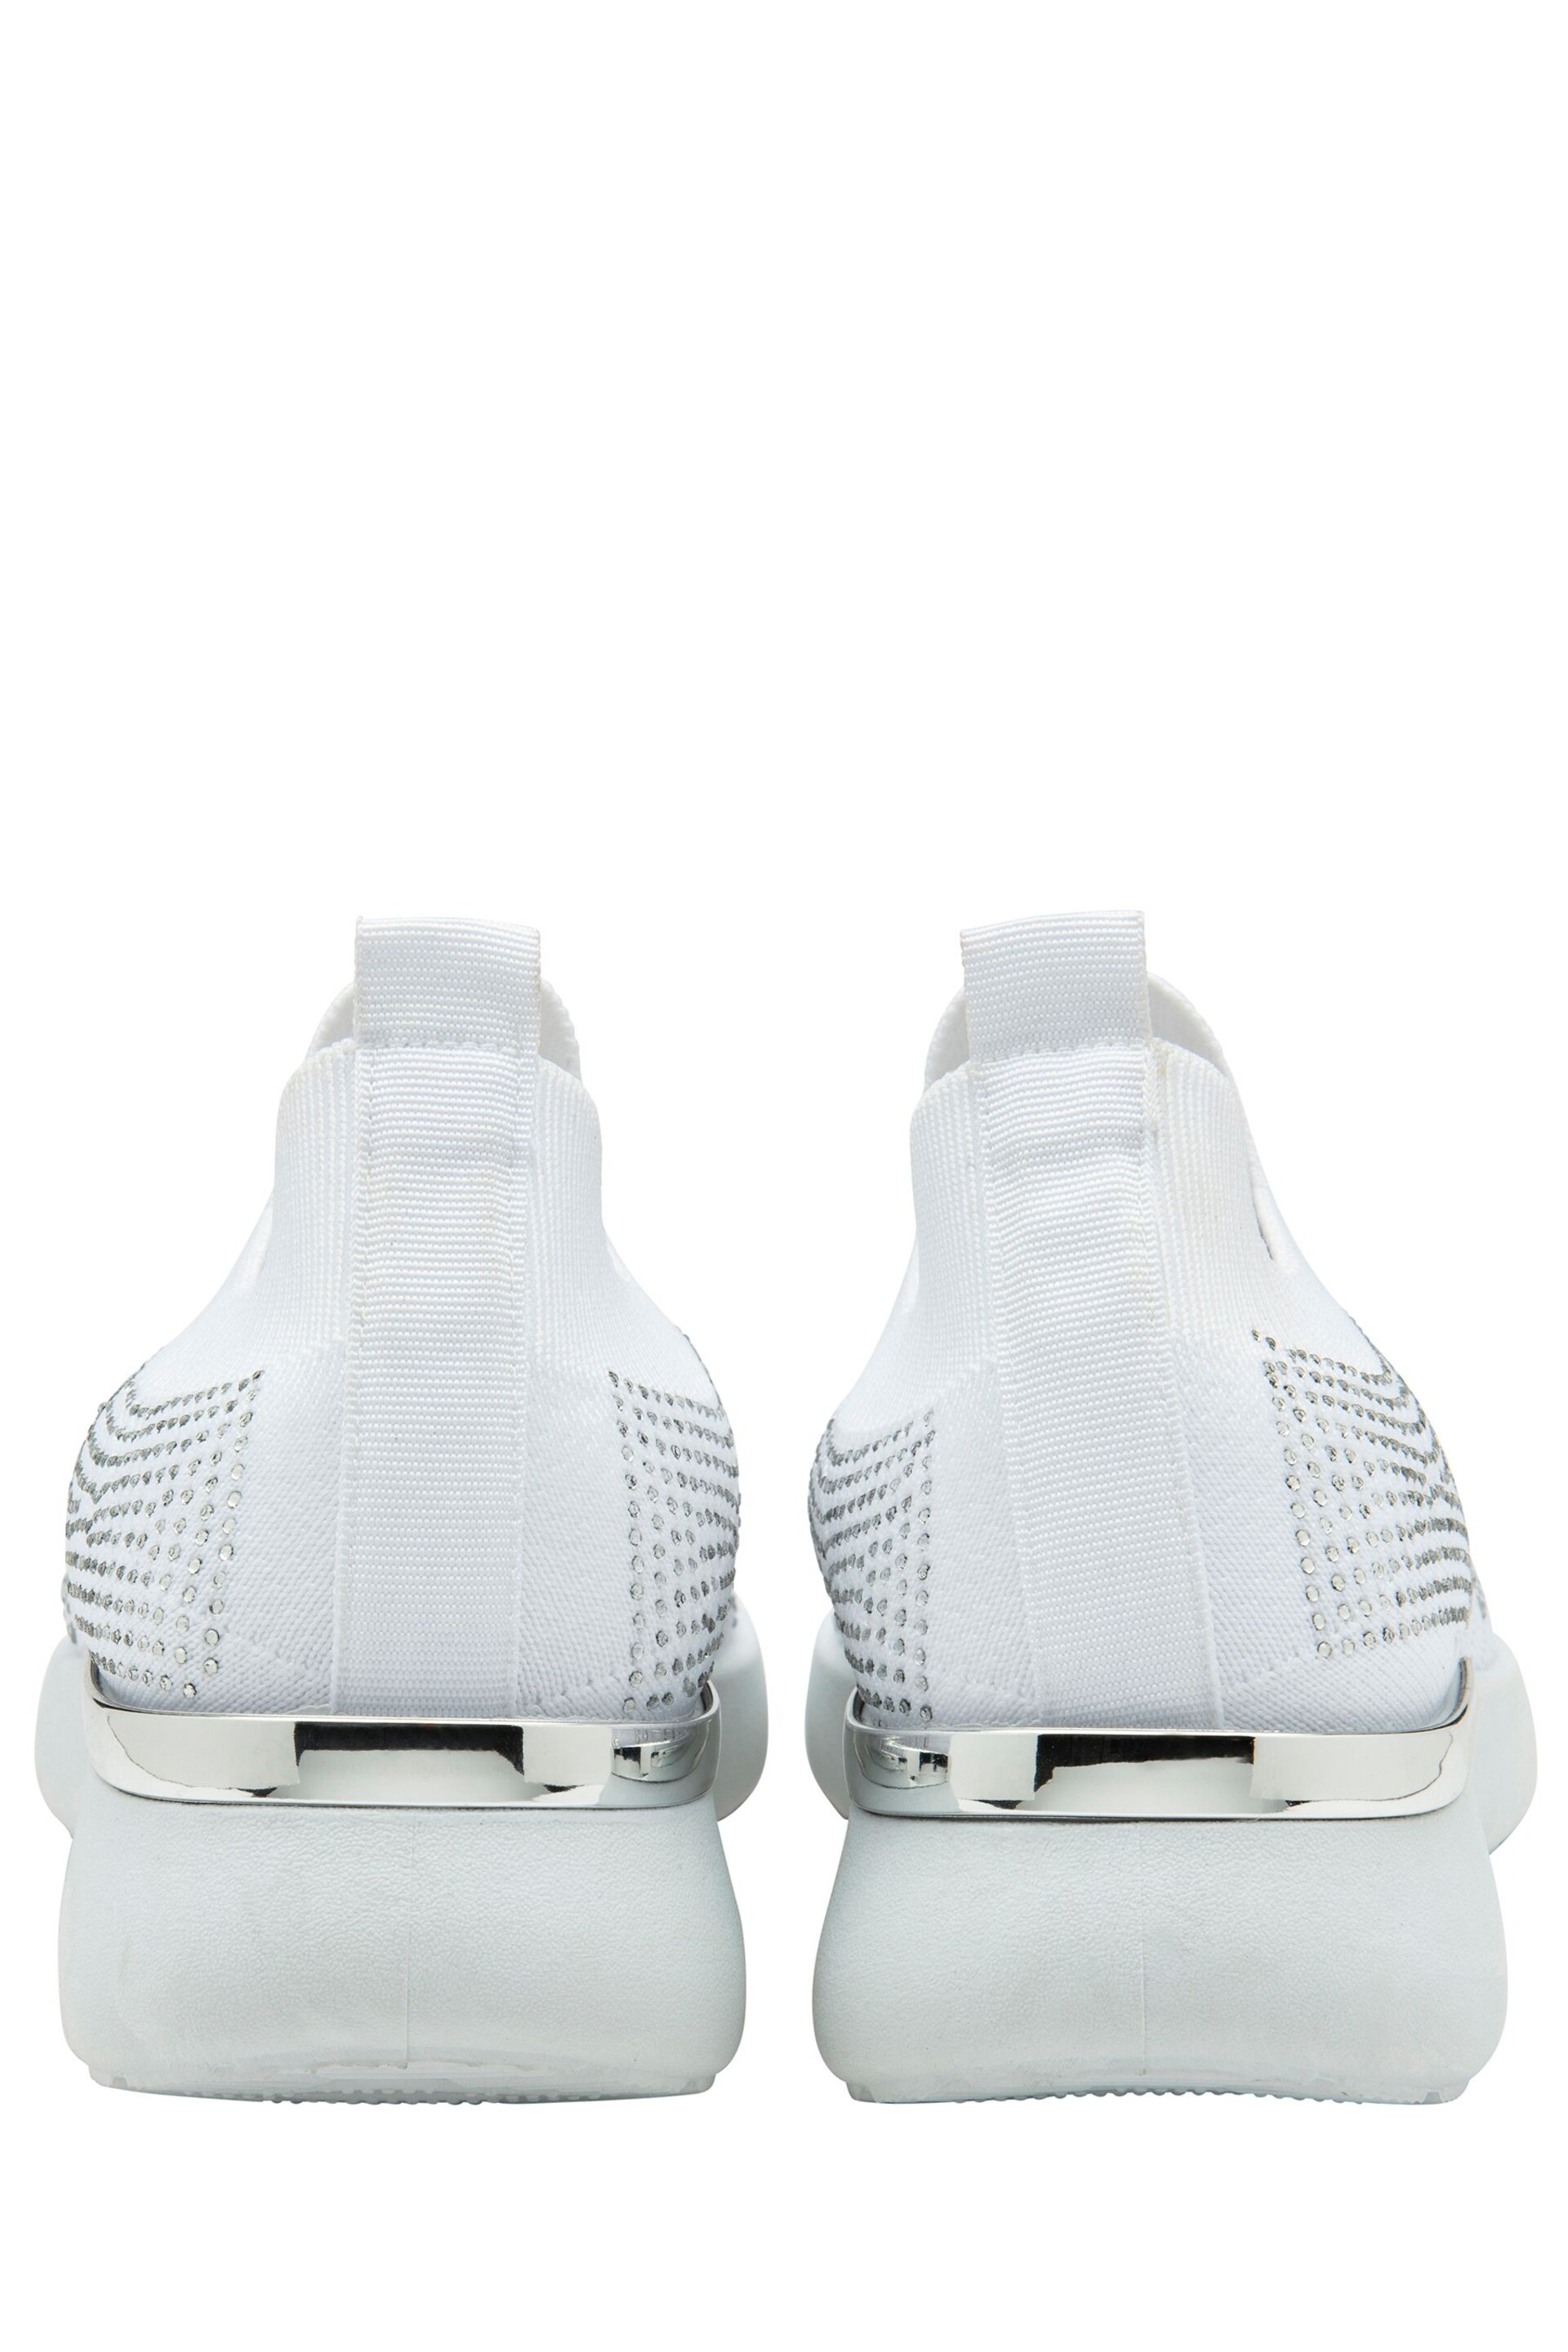 Lotus White Casual Knit Trainers - Image 3 of 4